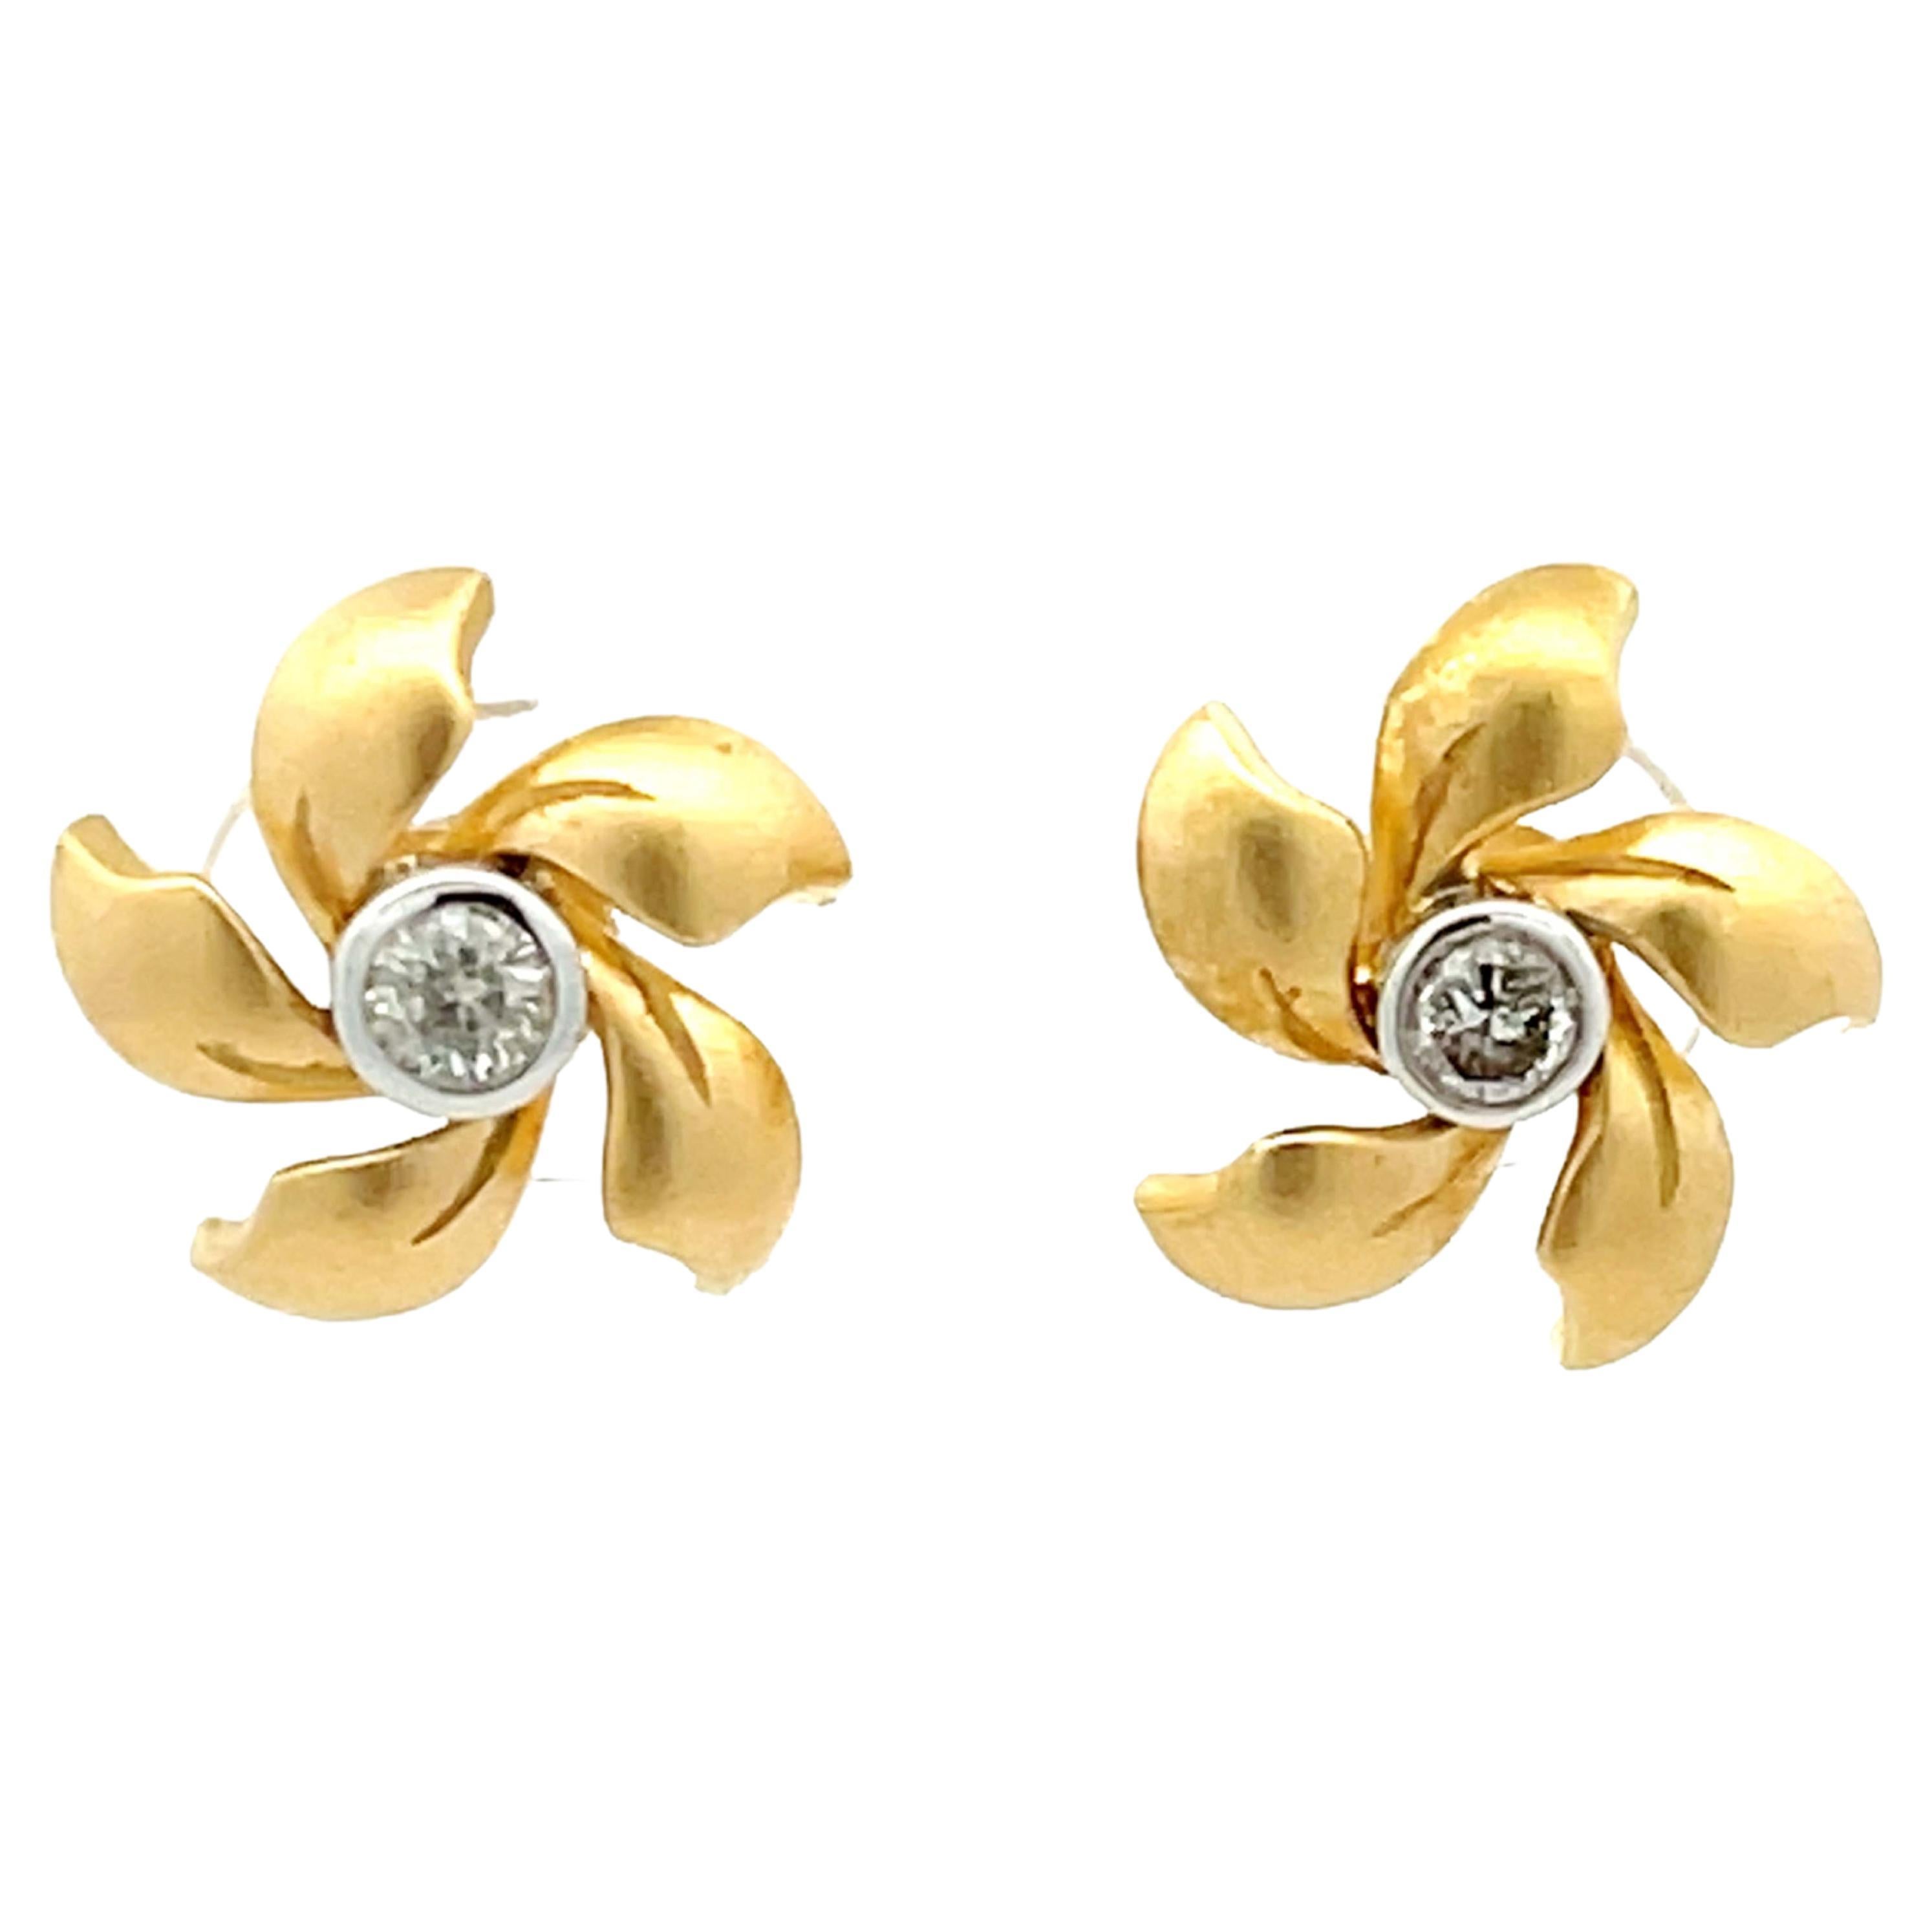 Satin Finish Flower and Diamond Center Stud Earrings in 14k Yellow Gold For Sale